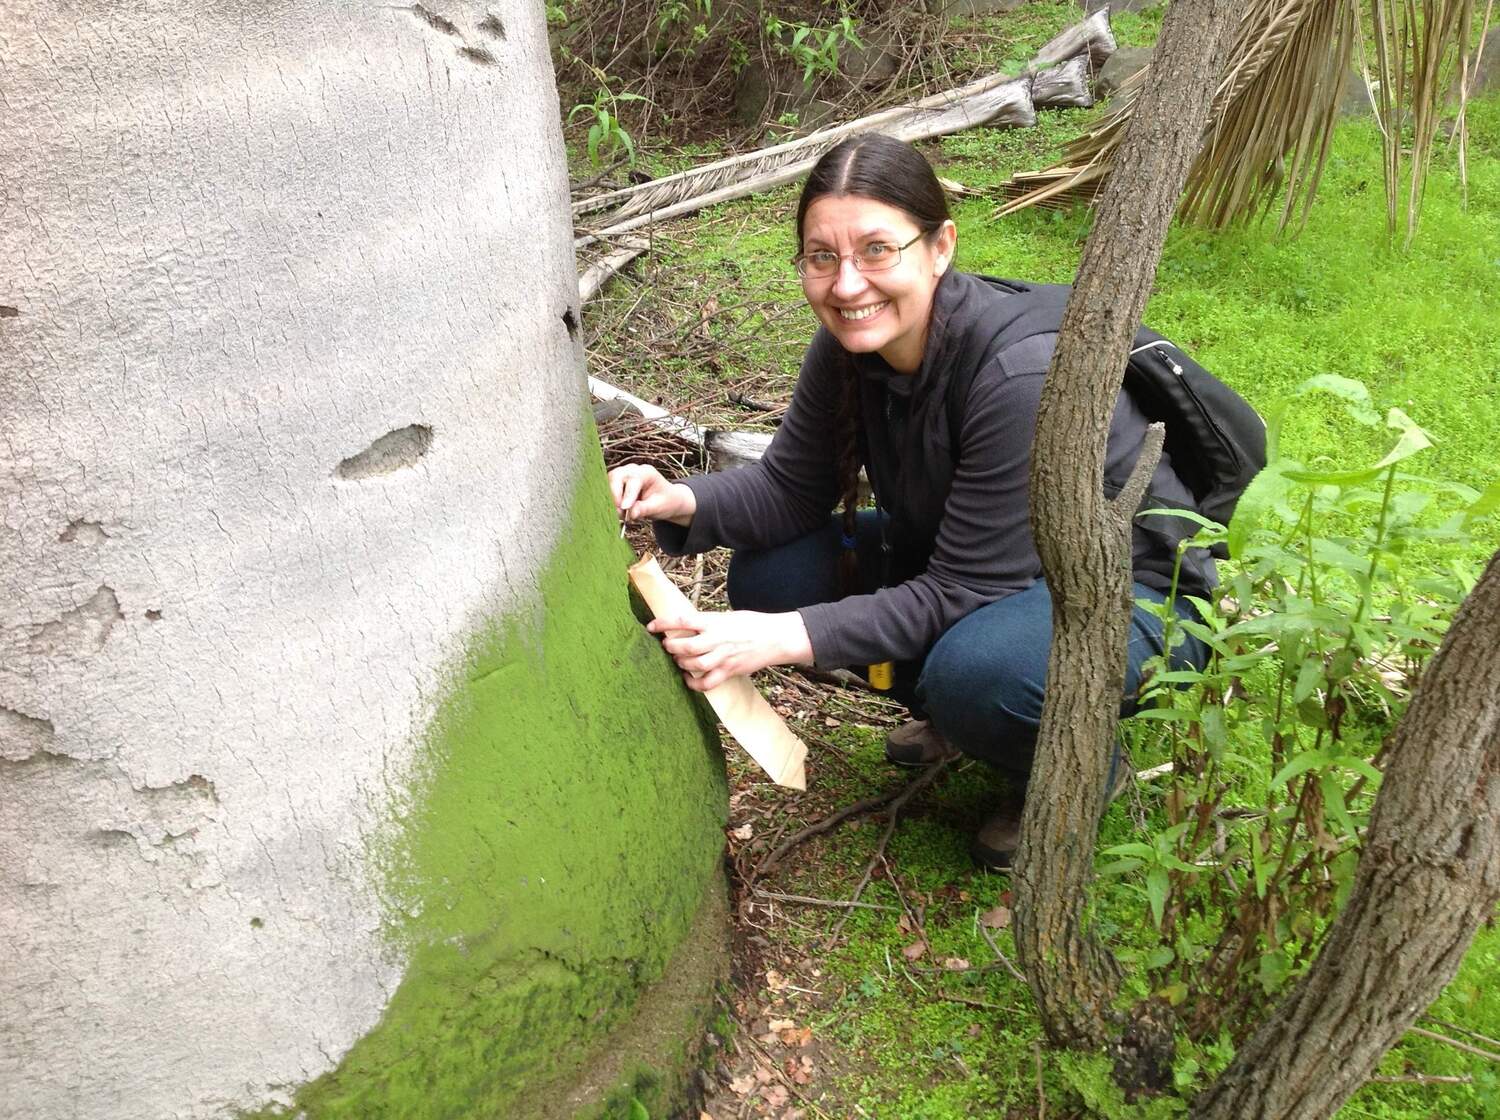 Dr Tatyana Darienko, University of Göttingen, co-author on the study, collecting the green biofilms on the trees and rocks that are the natural habitat of the rare alga Chlorokybus.